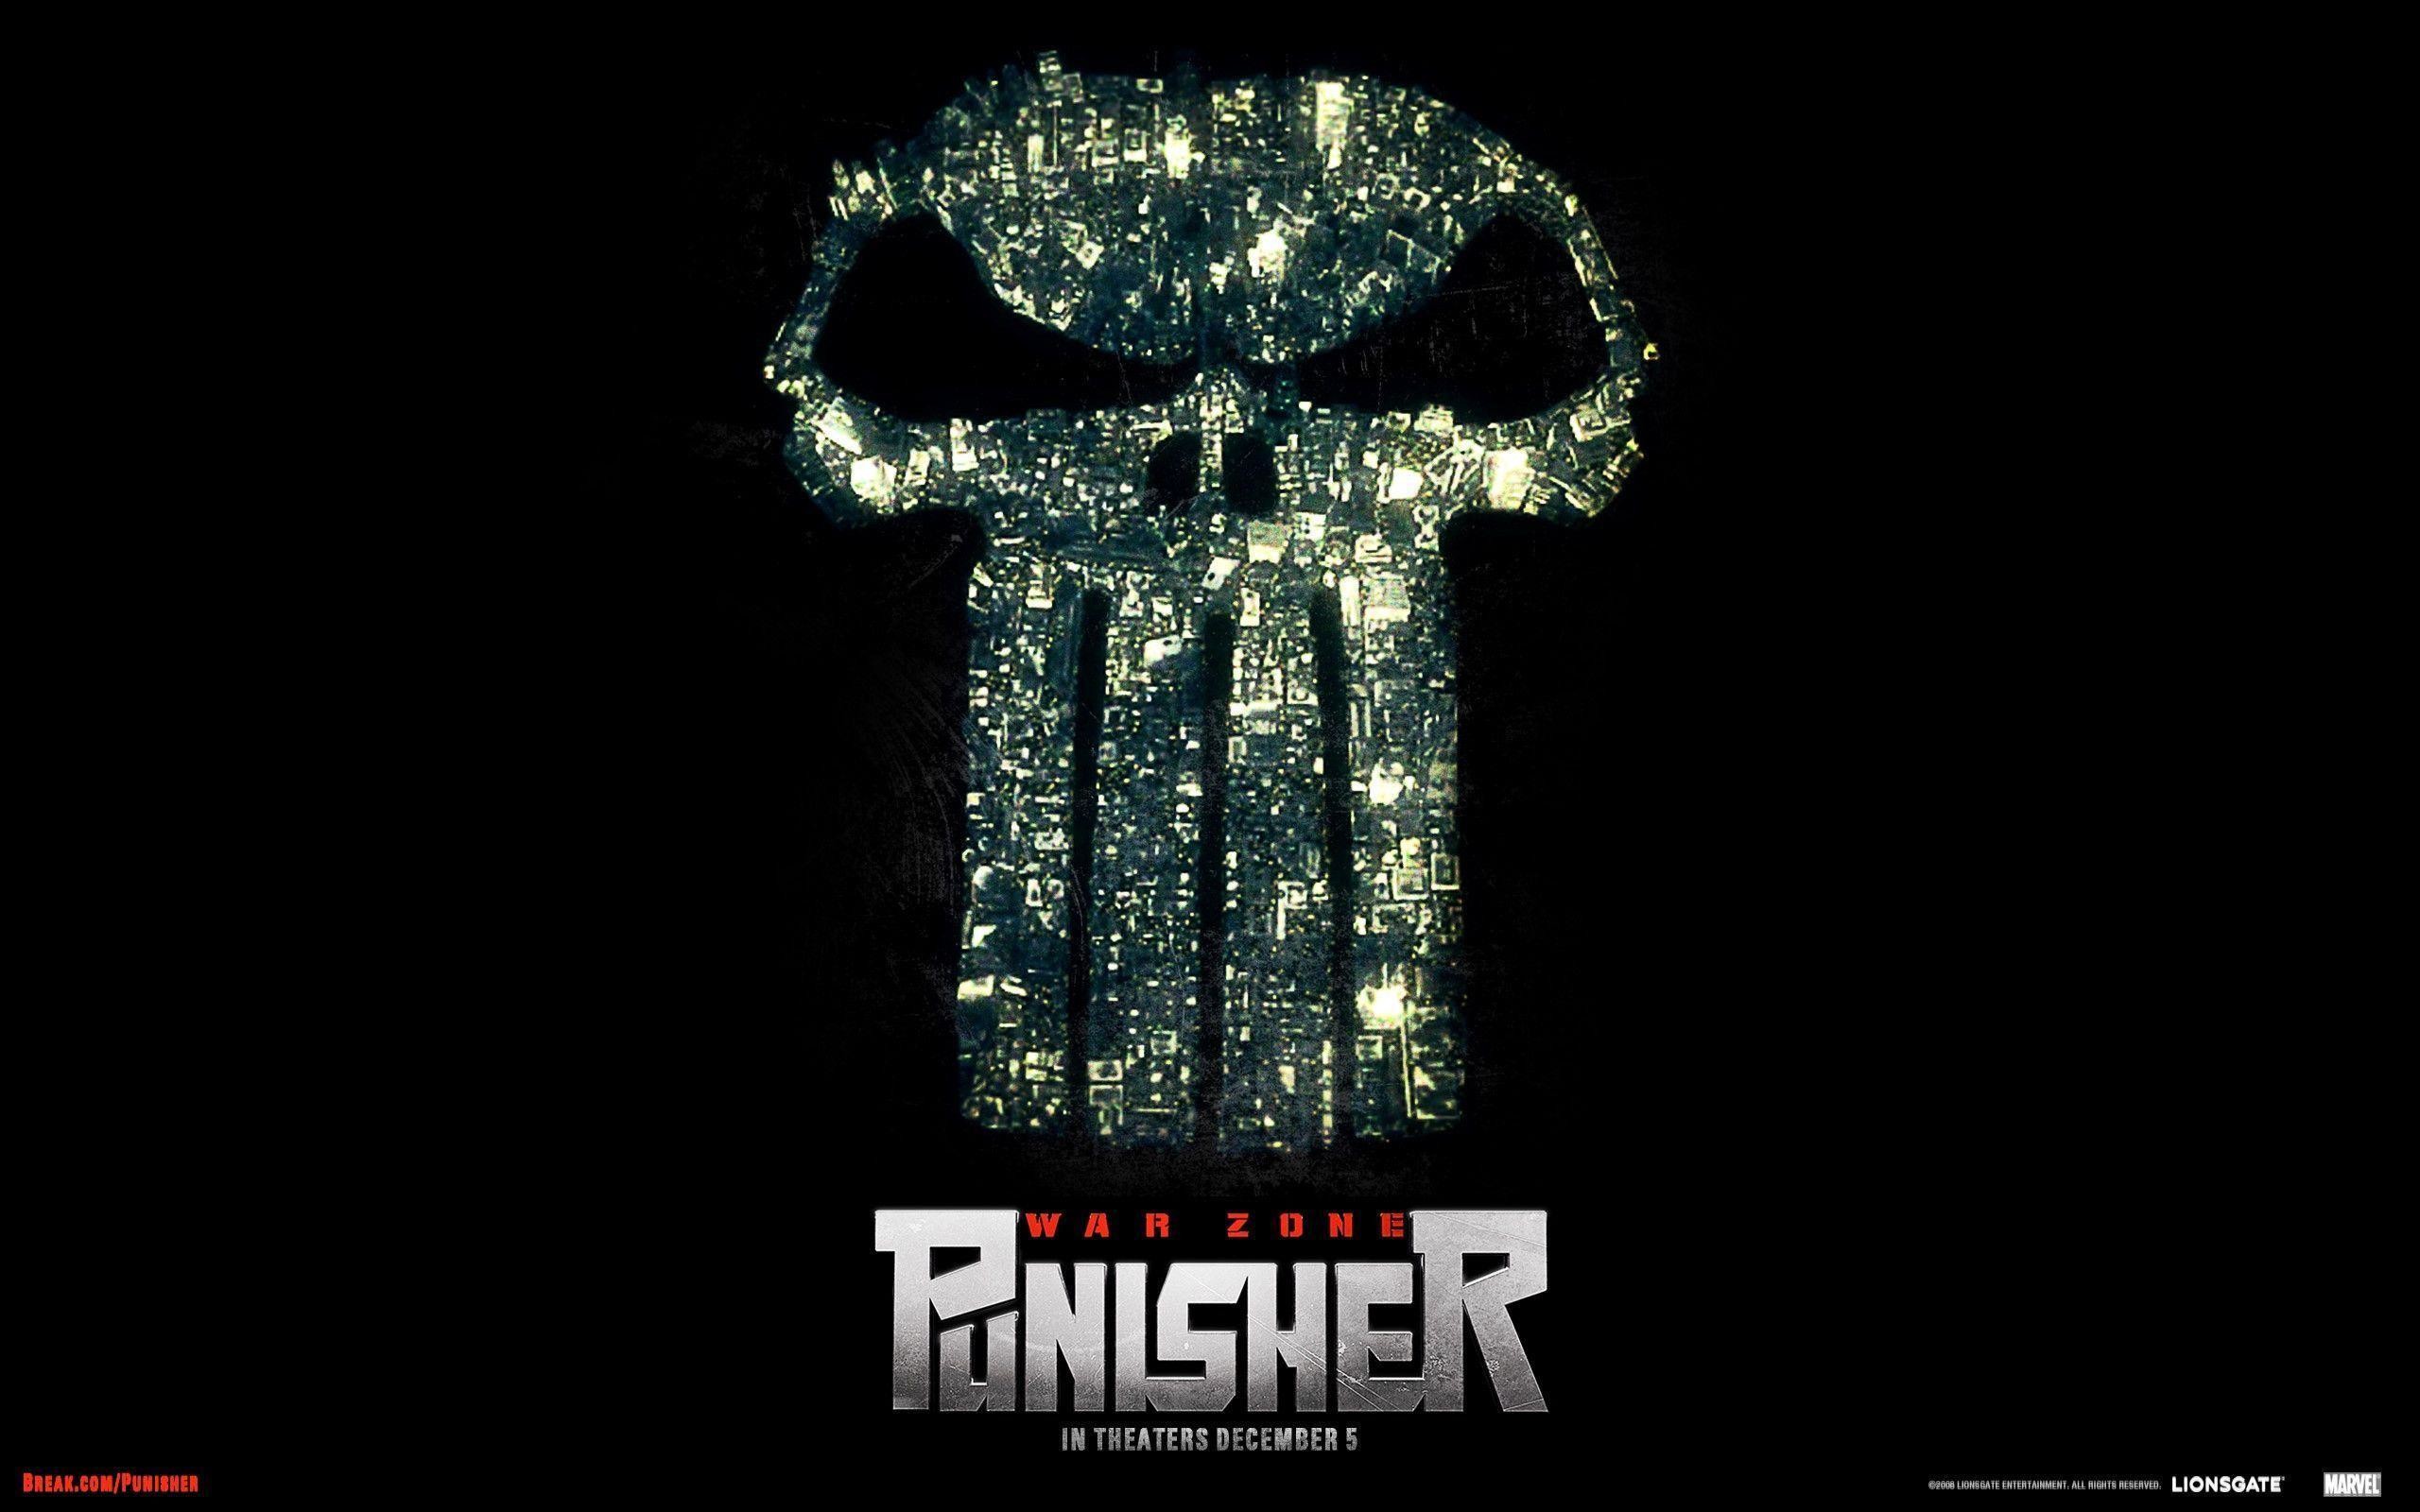 2560x1600 Punisher Logo Wallpapers - Wallpaper Cave